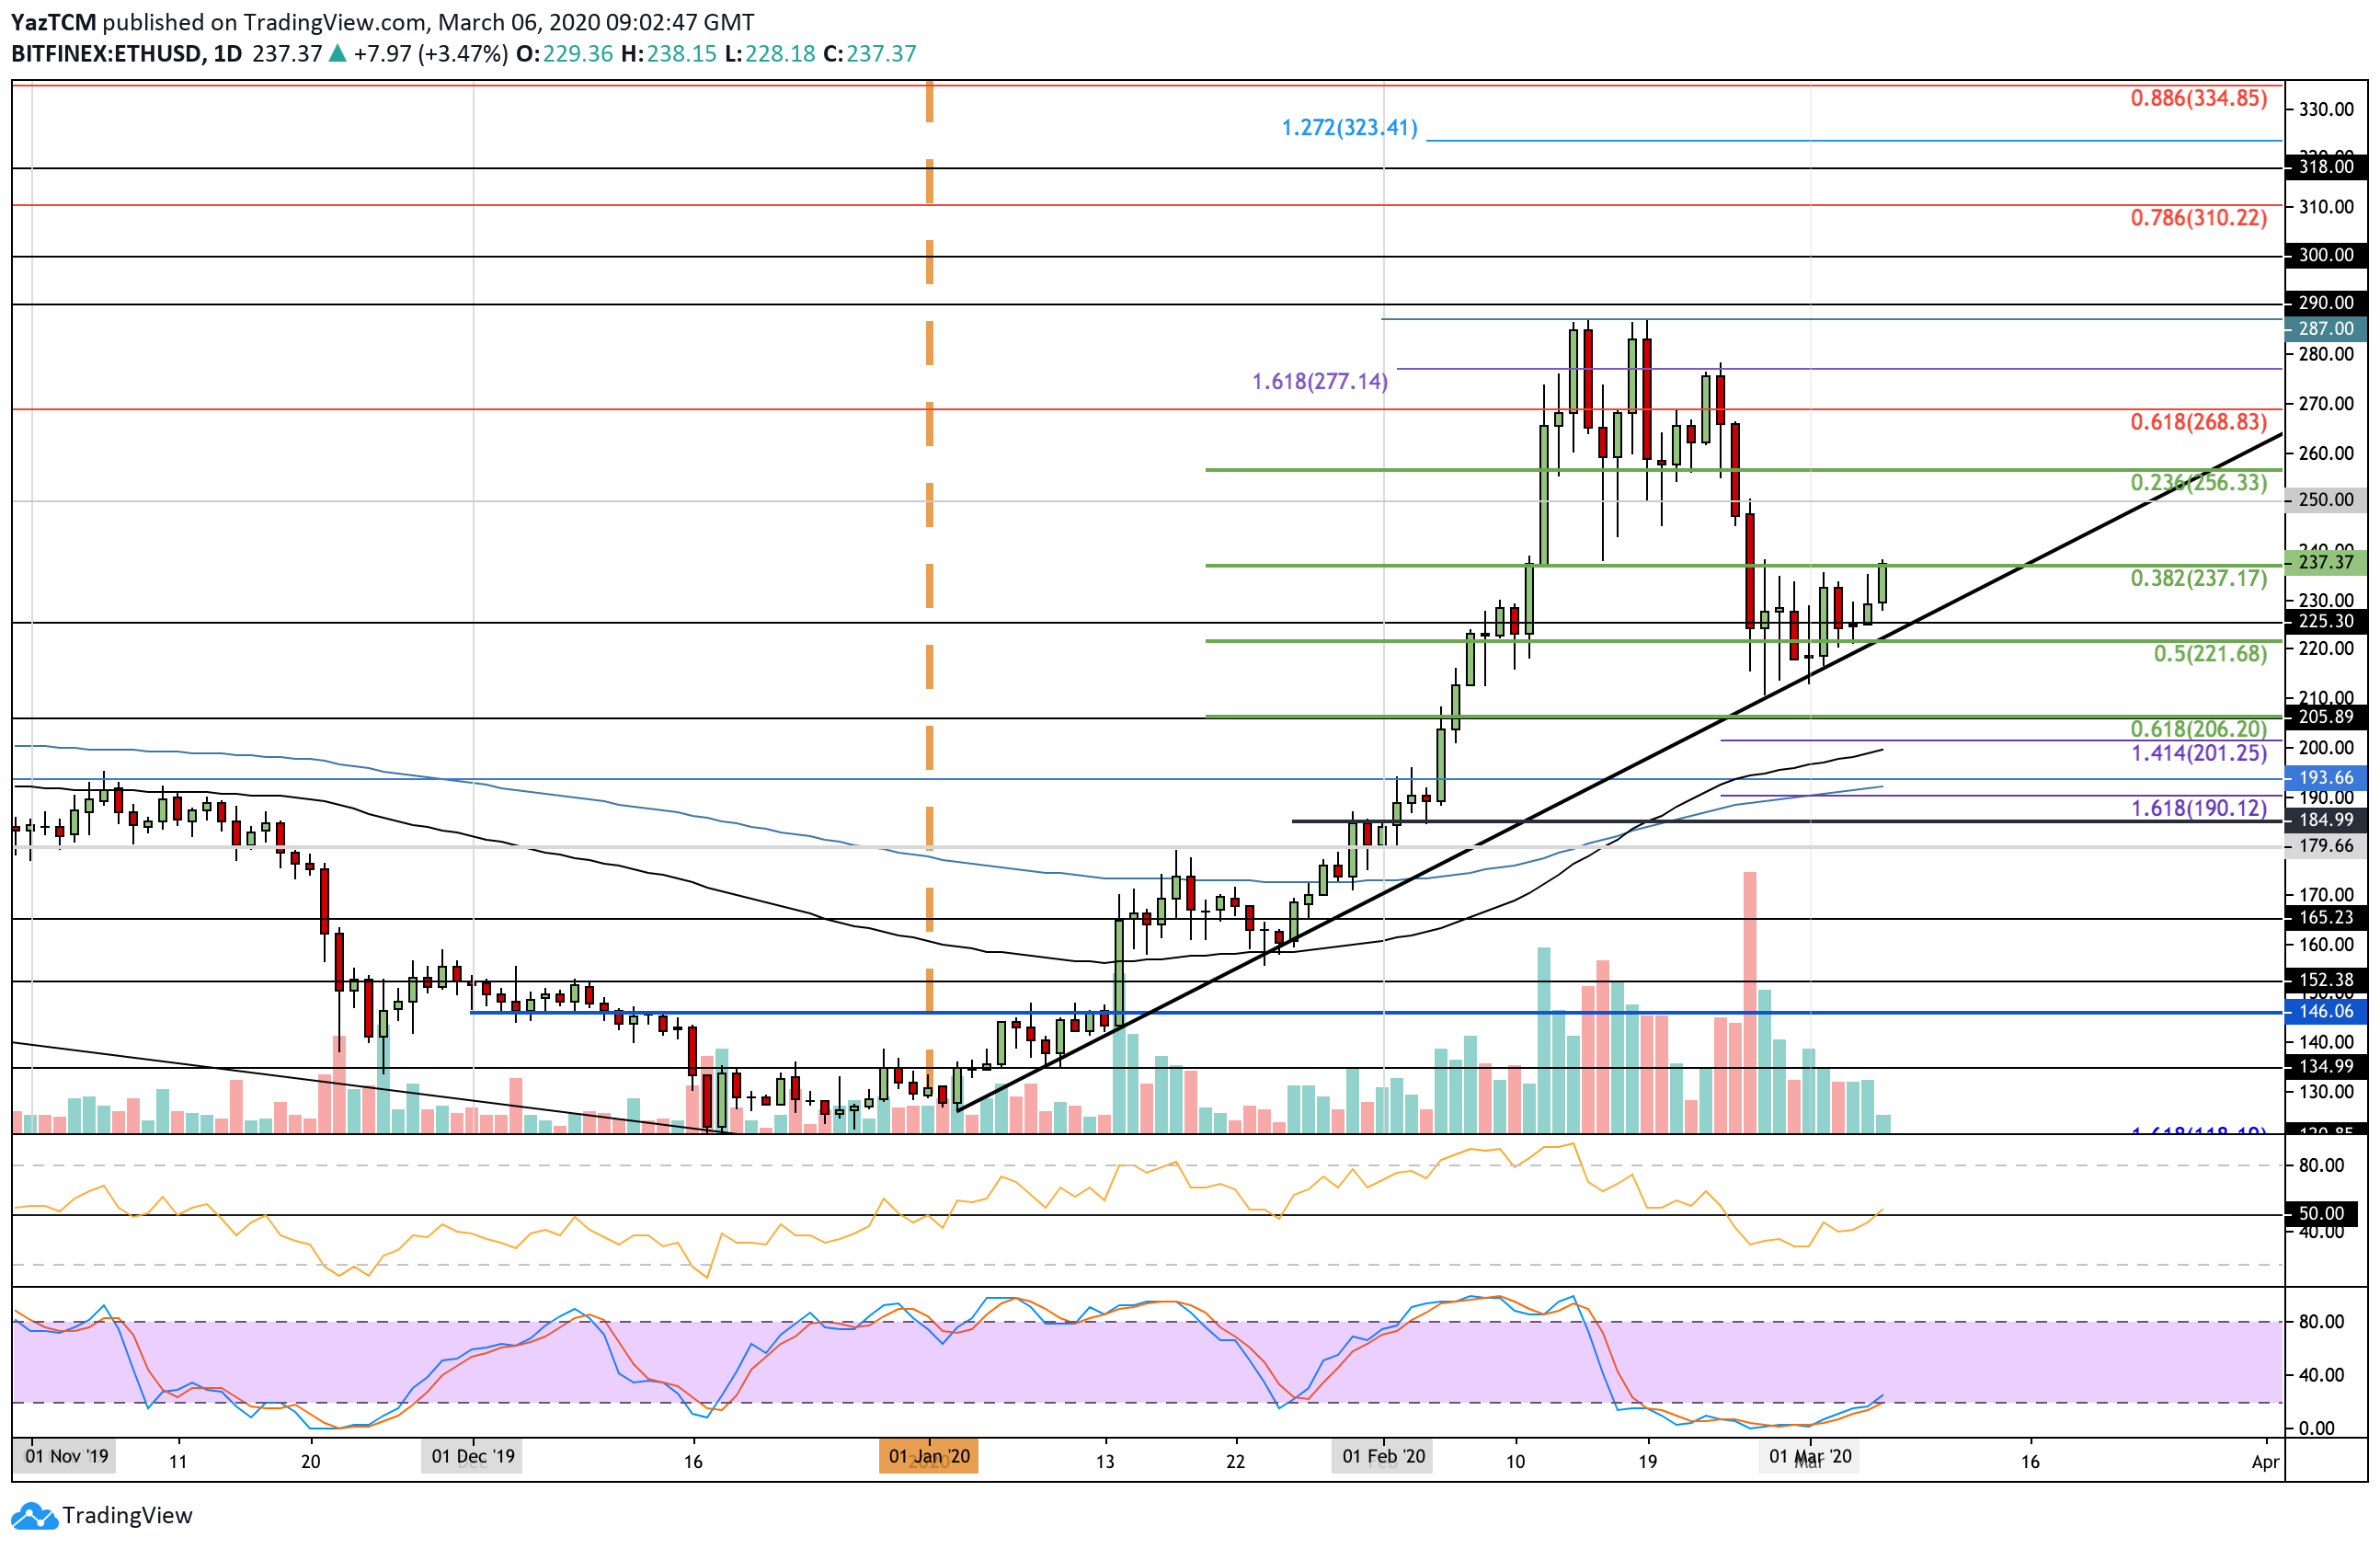 Ethereum Price Analysis: Following Recent Consolidation, Can ETH Reach $250 Price Target Soon?